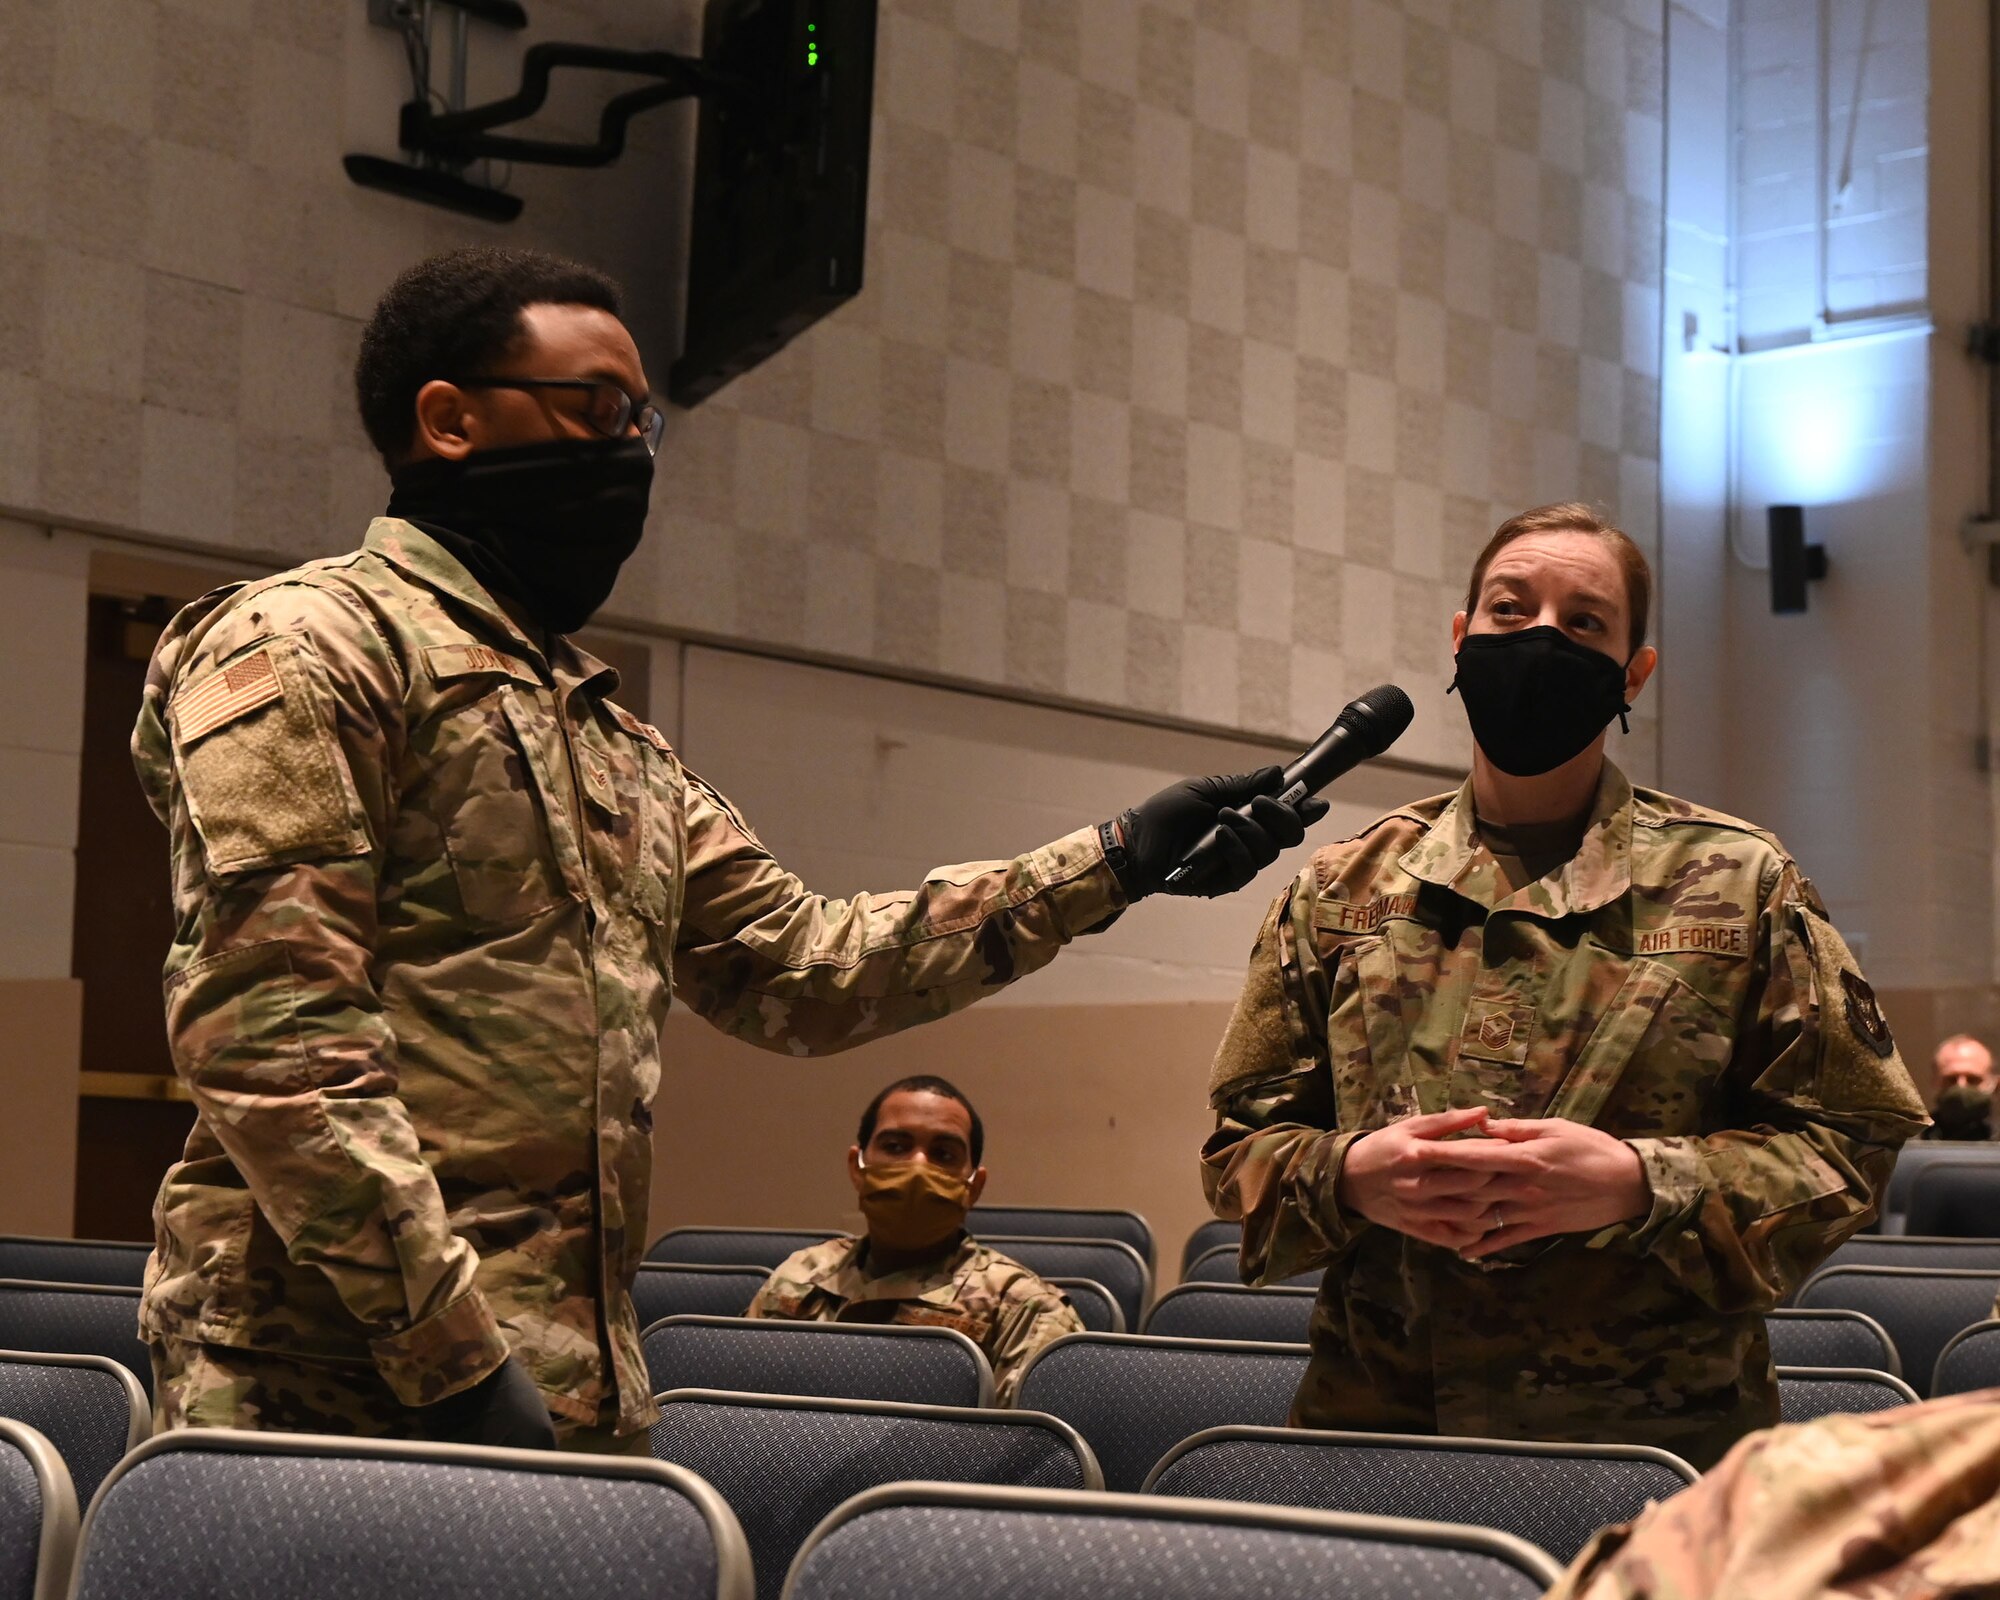 Master Sgt. Jennifer Freeman, 908th Logistics Readiness Squadron first sergeant, asks a question to the command teams of Air Force Reserve Command and Air Education and Training Command at Polifka Auditorium